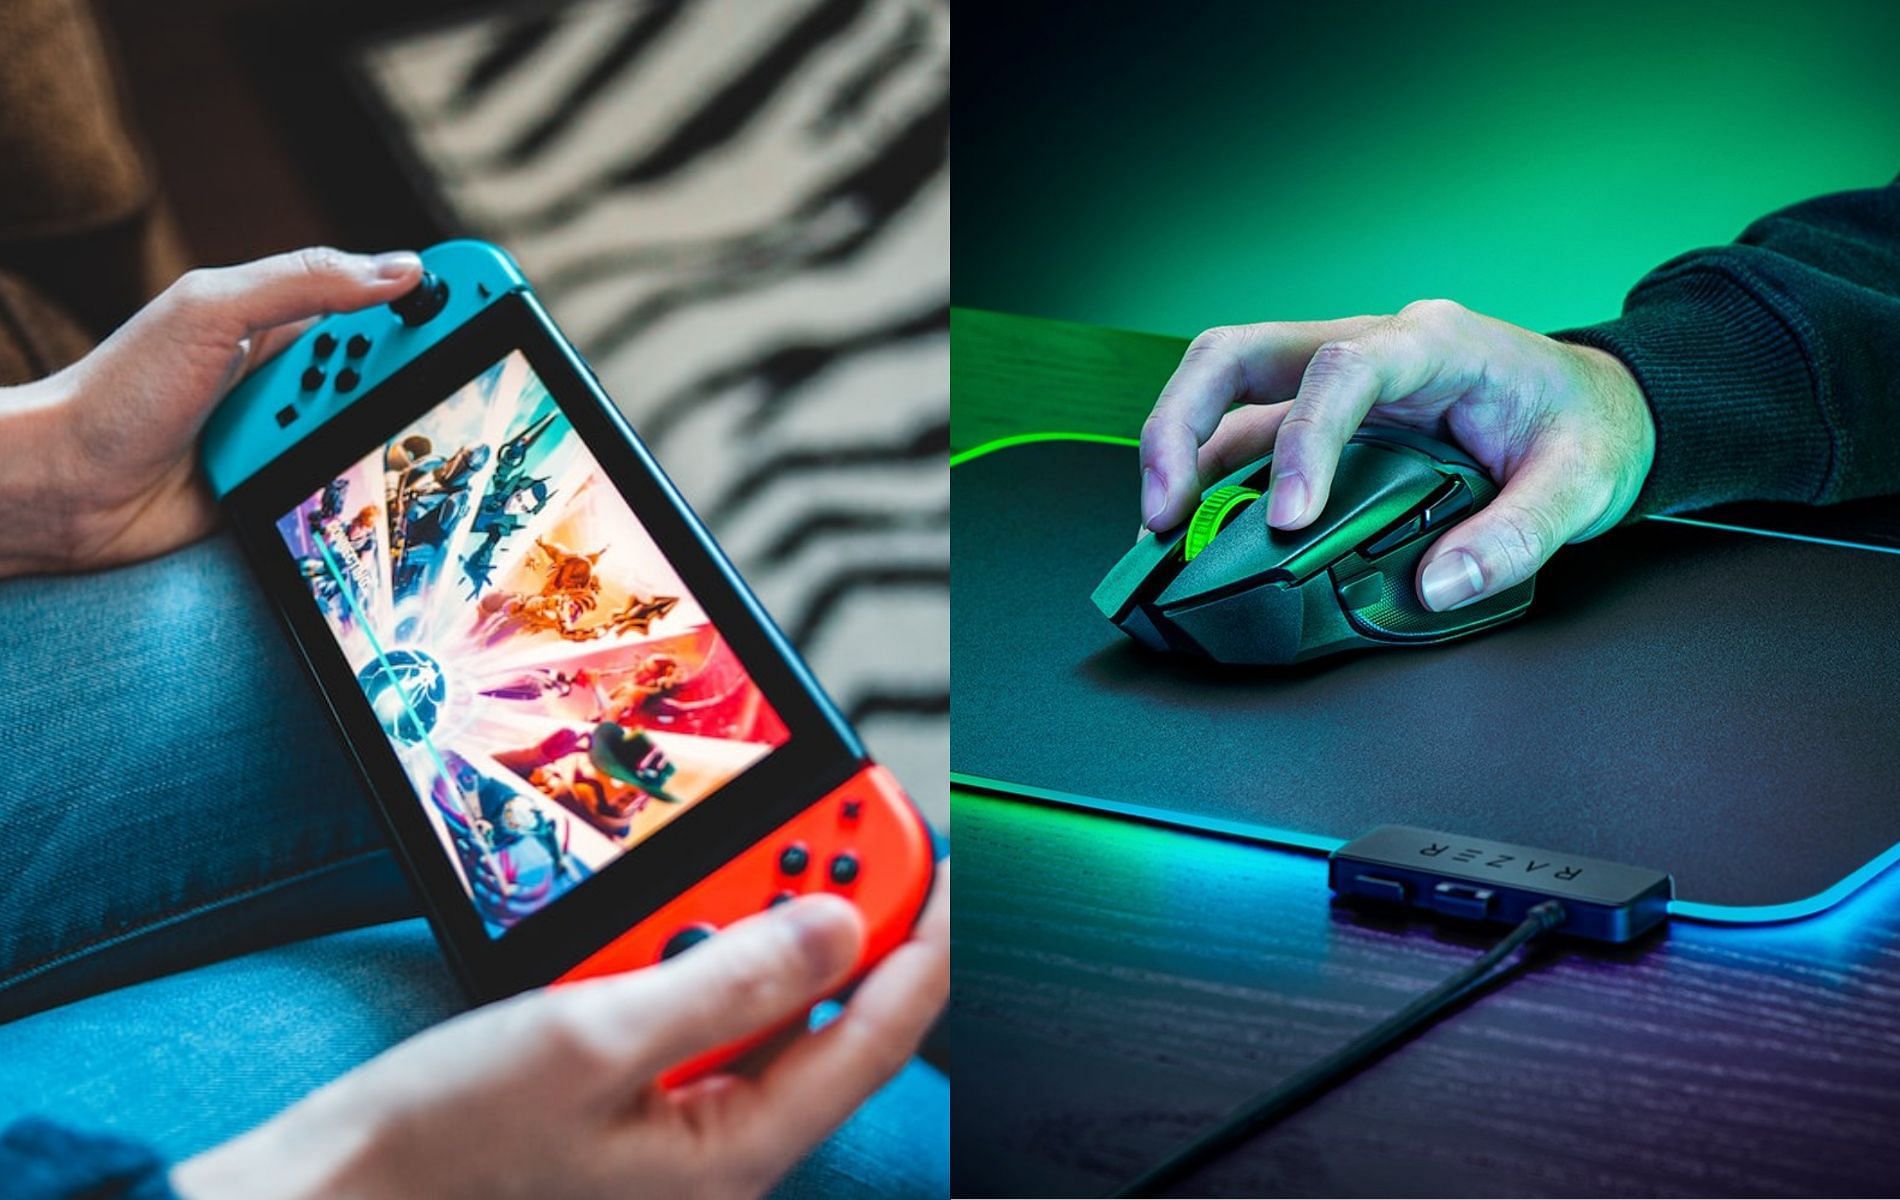 Image featuring Nintendo Switch console and a gaming mouse